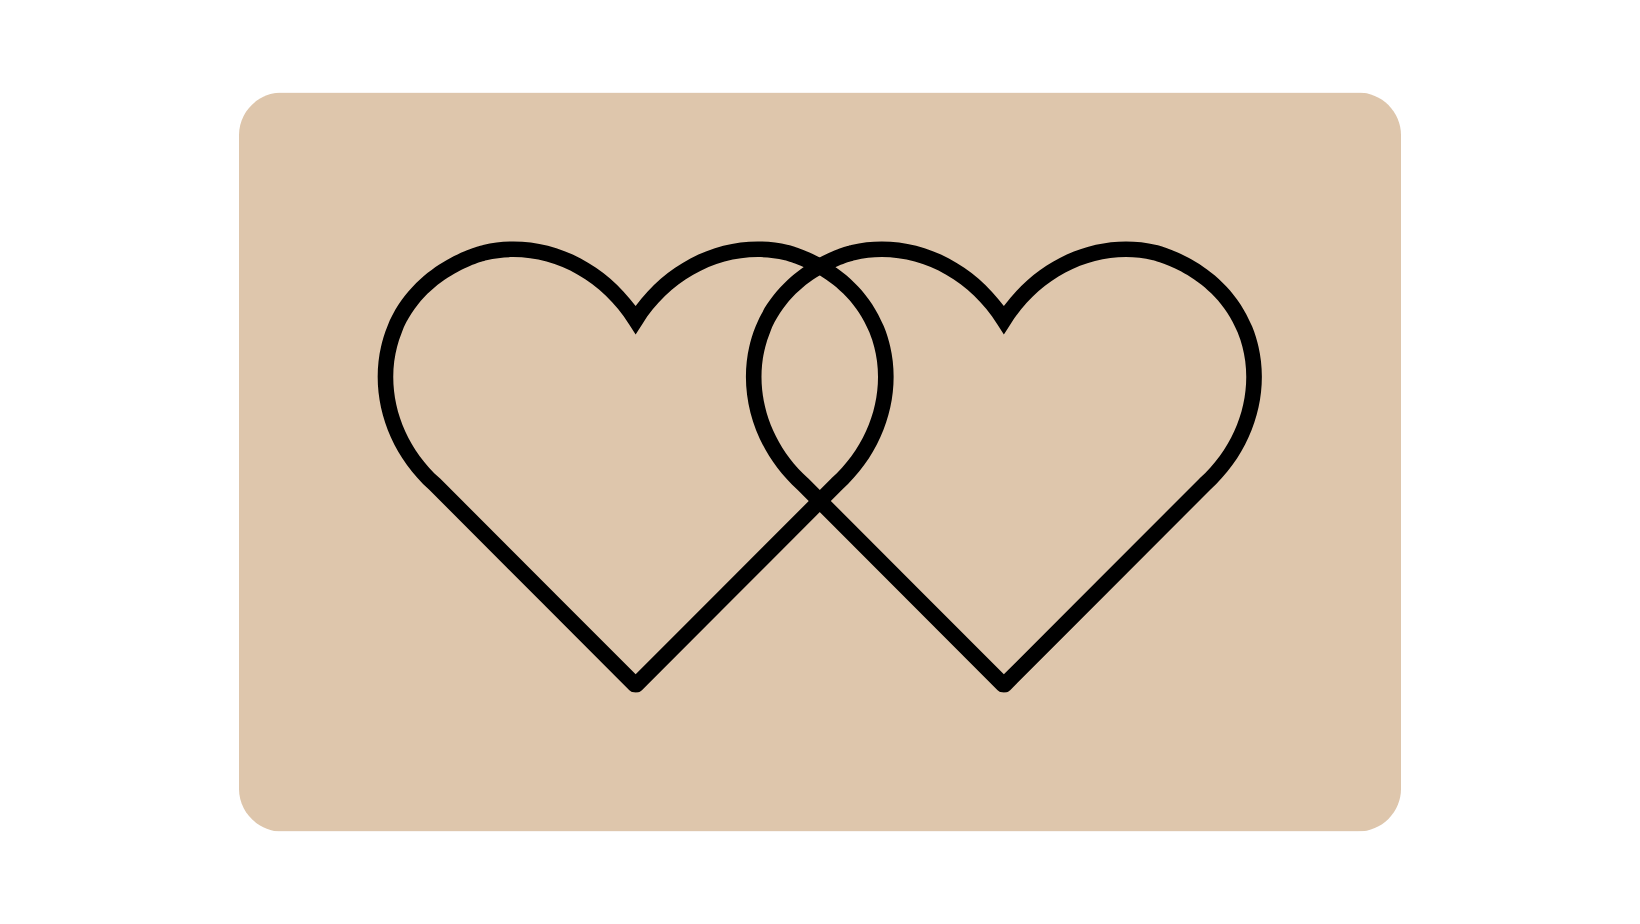 Line drawing of two intersecting hearts